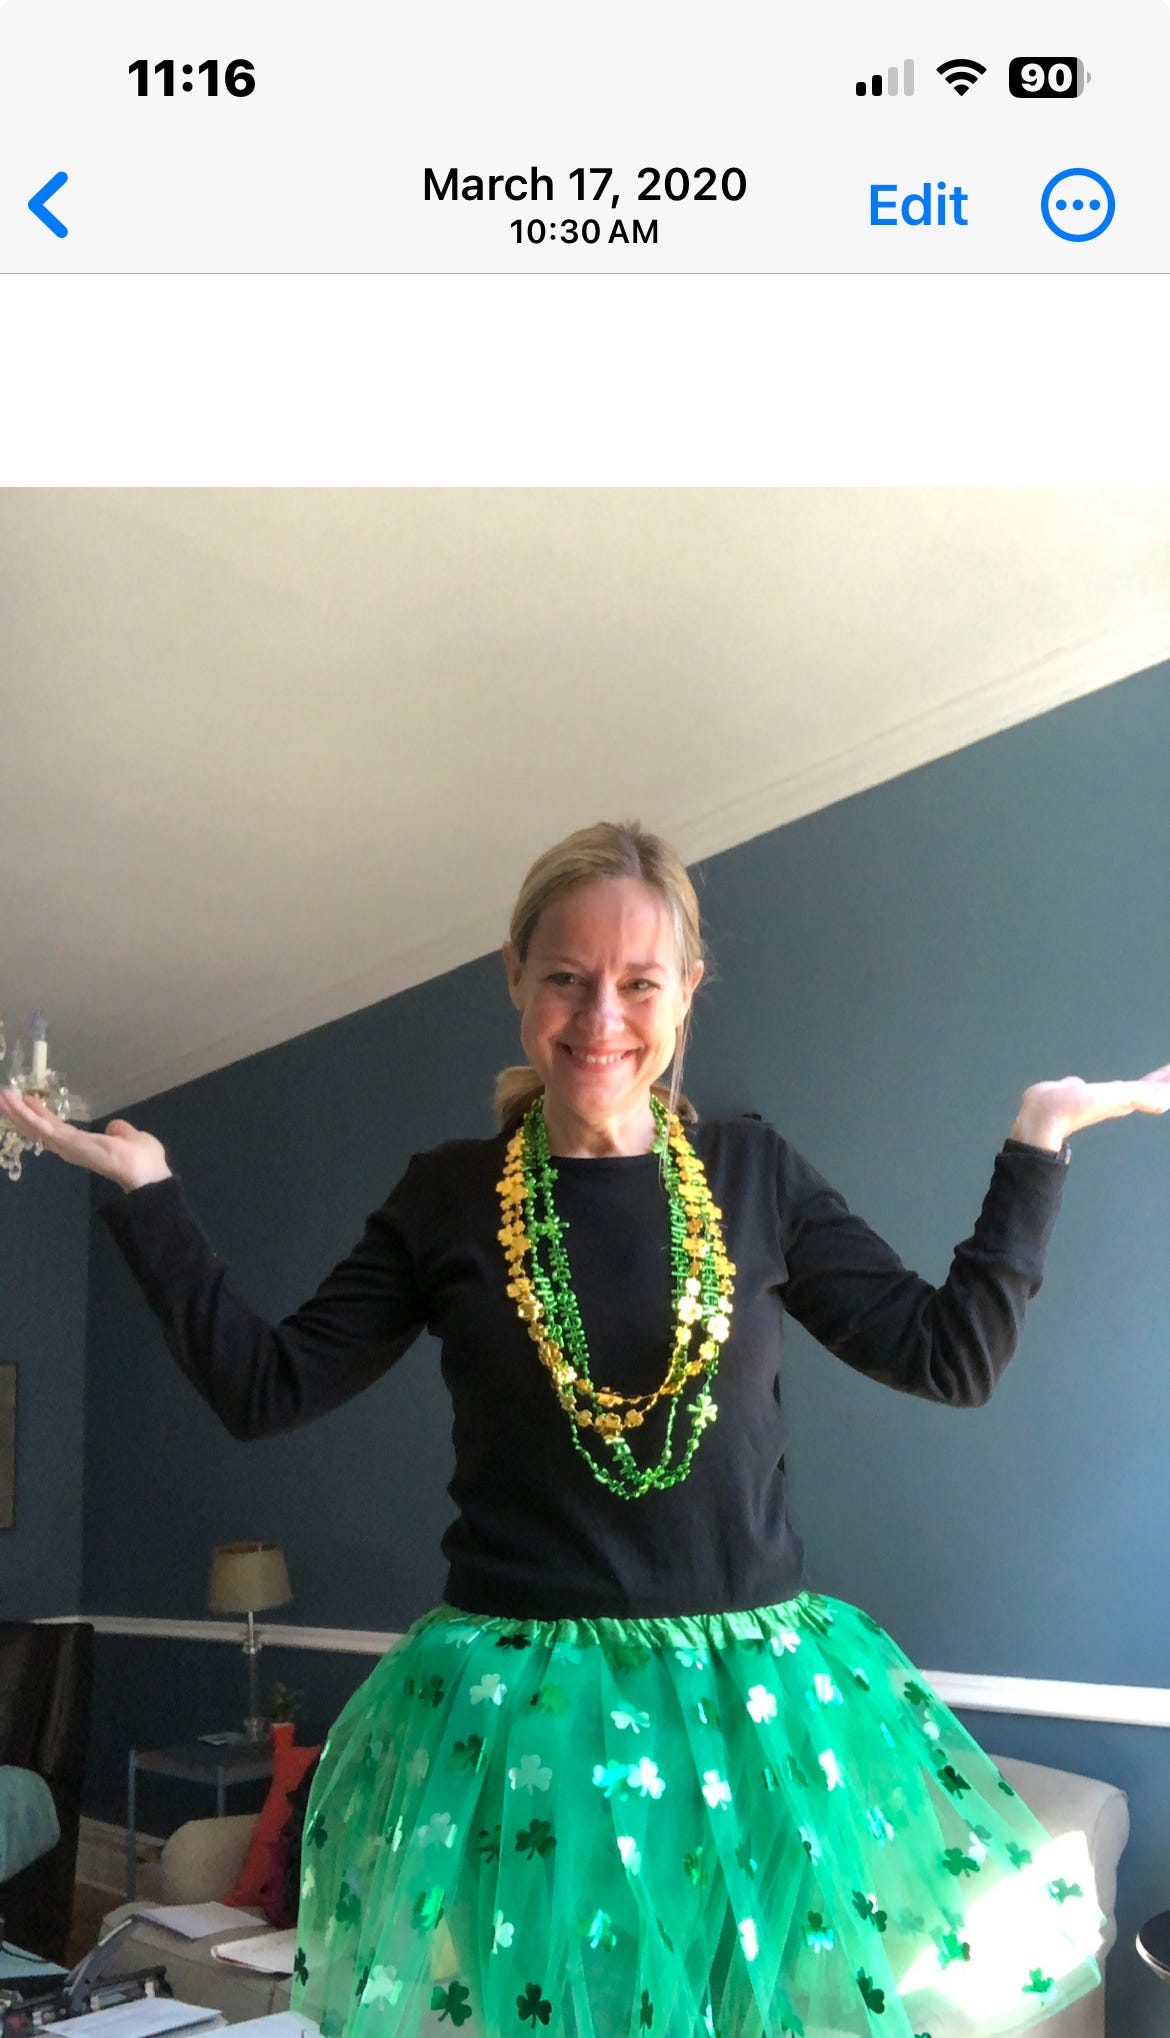 Blonde woman in a black shirt and green skirt. She's wearing green and yellow beads, and there are shamrocks on her skirt for St. Patrick's Day. She is smiling with her hands raised. The walls behind her are blue. 